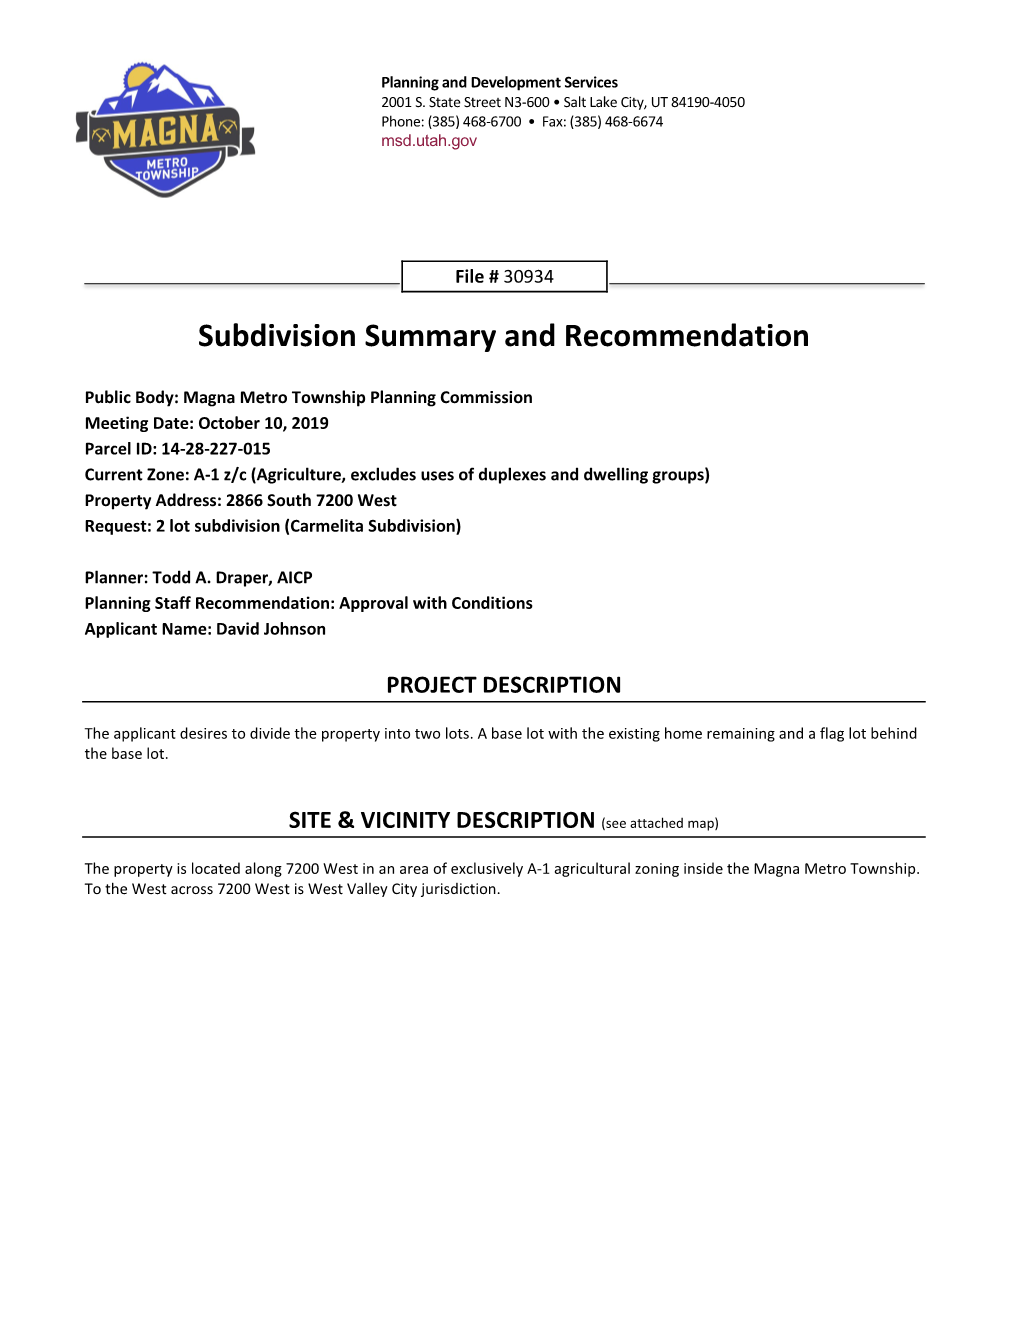 Subdivision Summary and Recommendation